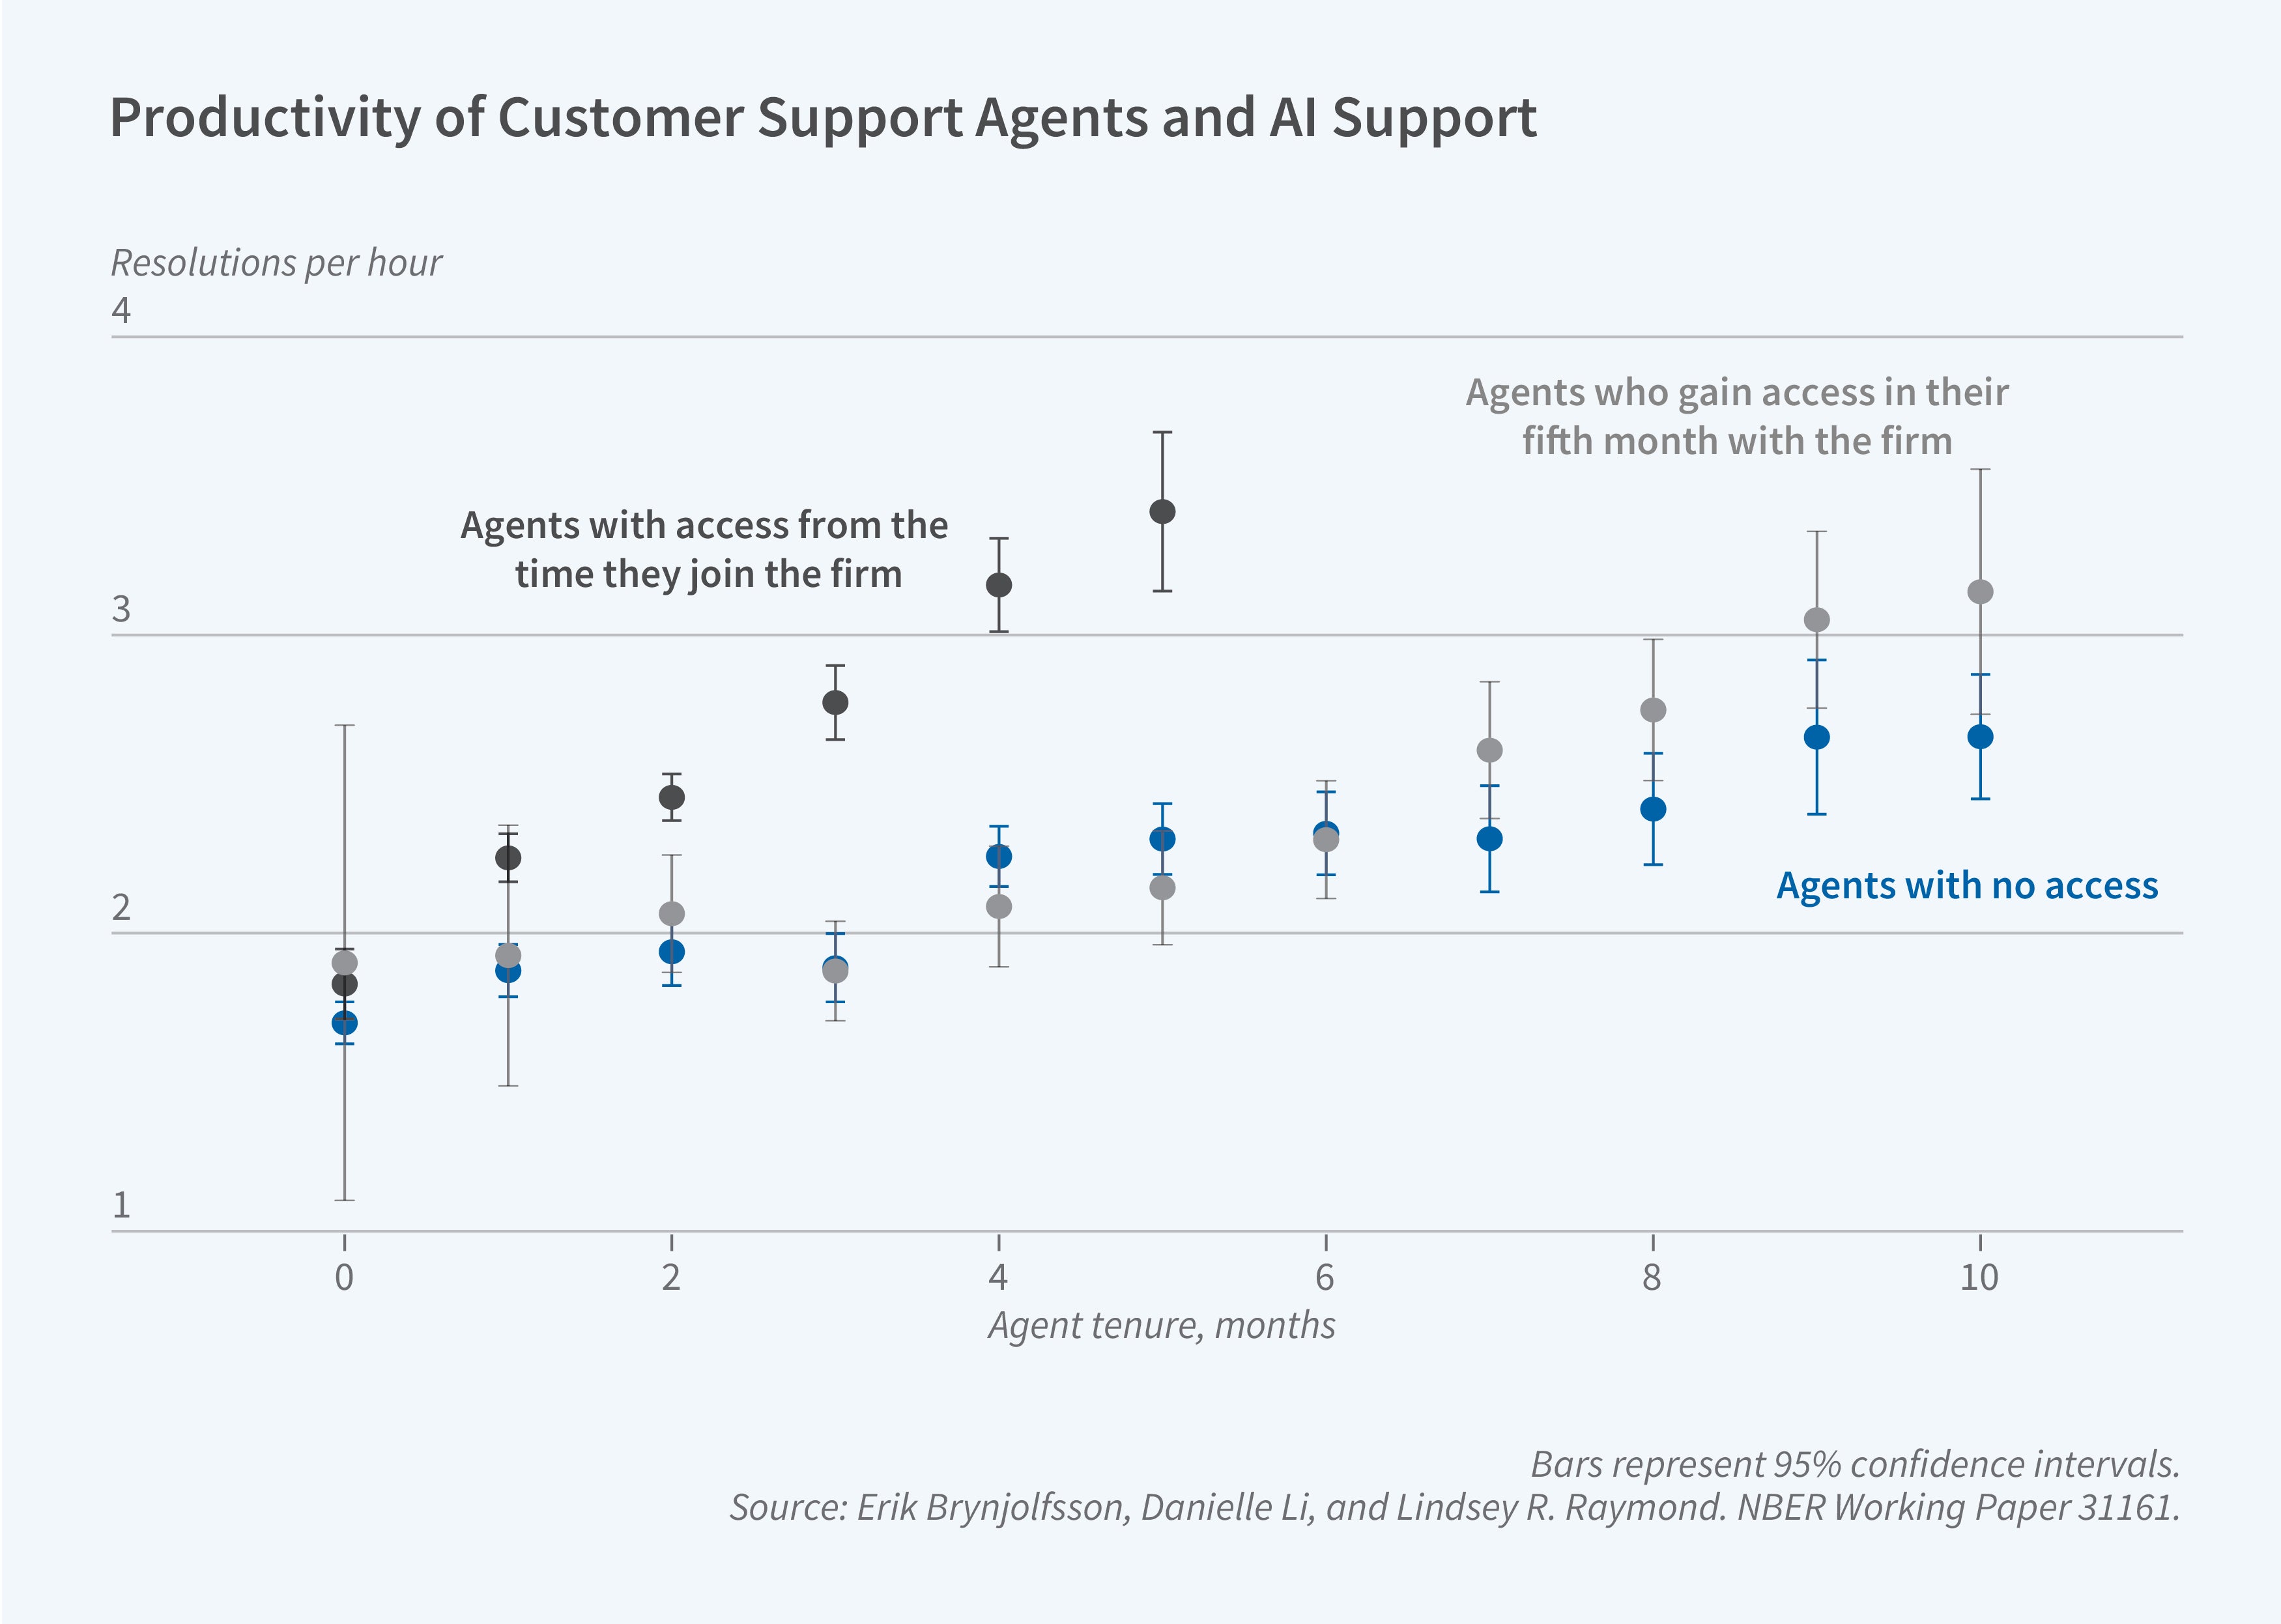 This figure is a scatter plot titled, Productivity of Customer Support Agents and AI Support. The y-axis is labeled, resolutions per hour. It ranges from 1 to 4.  The x-axis is labeled, agent tenure, months. It ranges from 0 to 10. The graph displays three sets of scatter points representing different groups of agents: those with access to a specific resource from the time they join the firm, those who gain access in their fifth month with the firm, and those with no access at all. All three sets of agents start at around 1.75 resolutions per hour. The agents with access to the resource from the time they join the firm experience a steady increase in their resolution rate, reaching approximately 3.4 resolutions per hour at the 5-month mark. The agents who gain access to the resource in their fifth month with the firm only experience a significant increase in their resolution rate after the 5-month point. Their performance improves, reaching about 3.2 resolutions per hour at the 10-month mark. The agents with no access to the resource throughout the 10-month period still show an overall increase in their resolution rate, reaching around 2.6 resolutions per hour at 10 months. However, their performance varies over time, with some fluctuations in the resolution rate. The note on the figure reads, Bars represent 95% confidence intervals. The source line reads, Source: Erik Brynjolfsson, Danielle Li, and Lindsey R. Raymond. NBER Working Paper 31161.